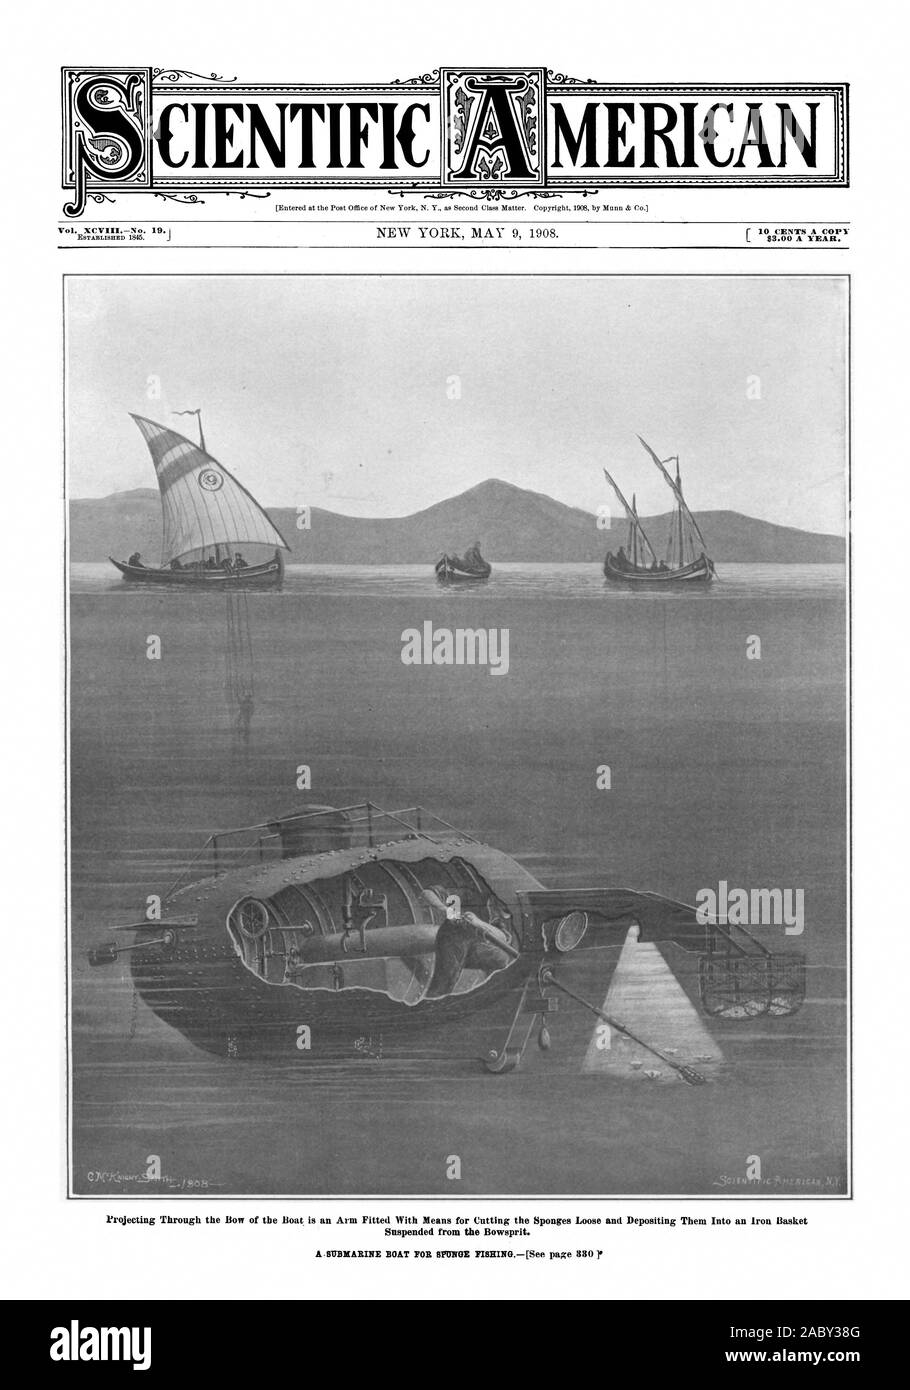 Projecting Through the Bow of the Boat is an Arm Fitted With Means for Cutting the Sponges Loose and Depositing Them Into an Iron Basket L $3.00 A YEAR. MERICAN, scientific american, 1908-05-09, submarine Stock Photo